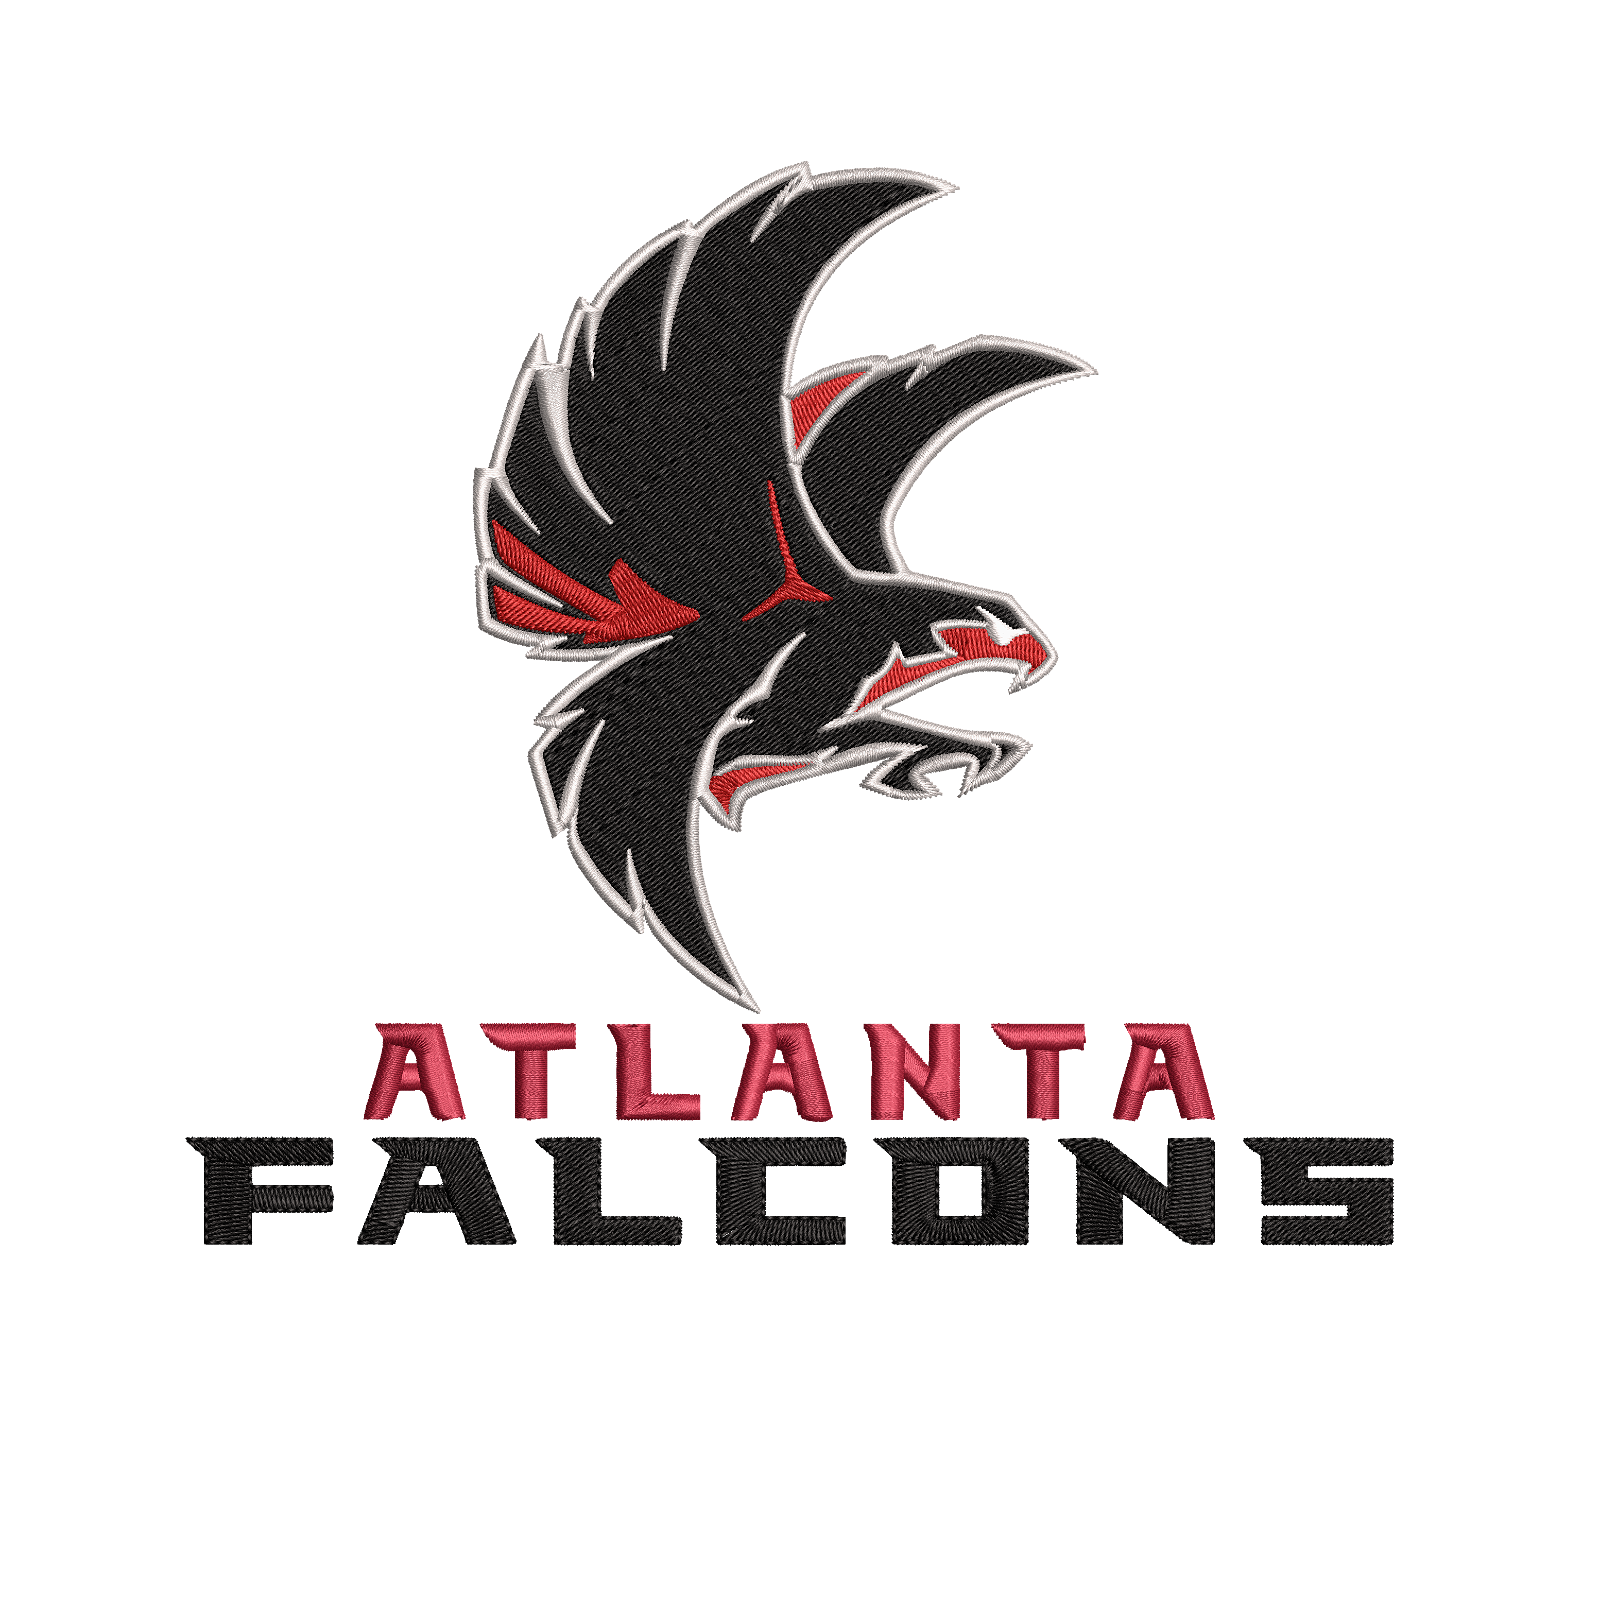 ATLANTA FALCONS- Pack of 6 Designs - Embroidery Design - FineryEmbroidery